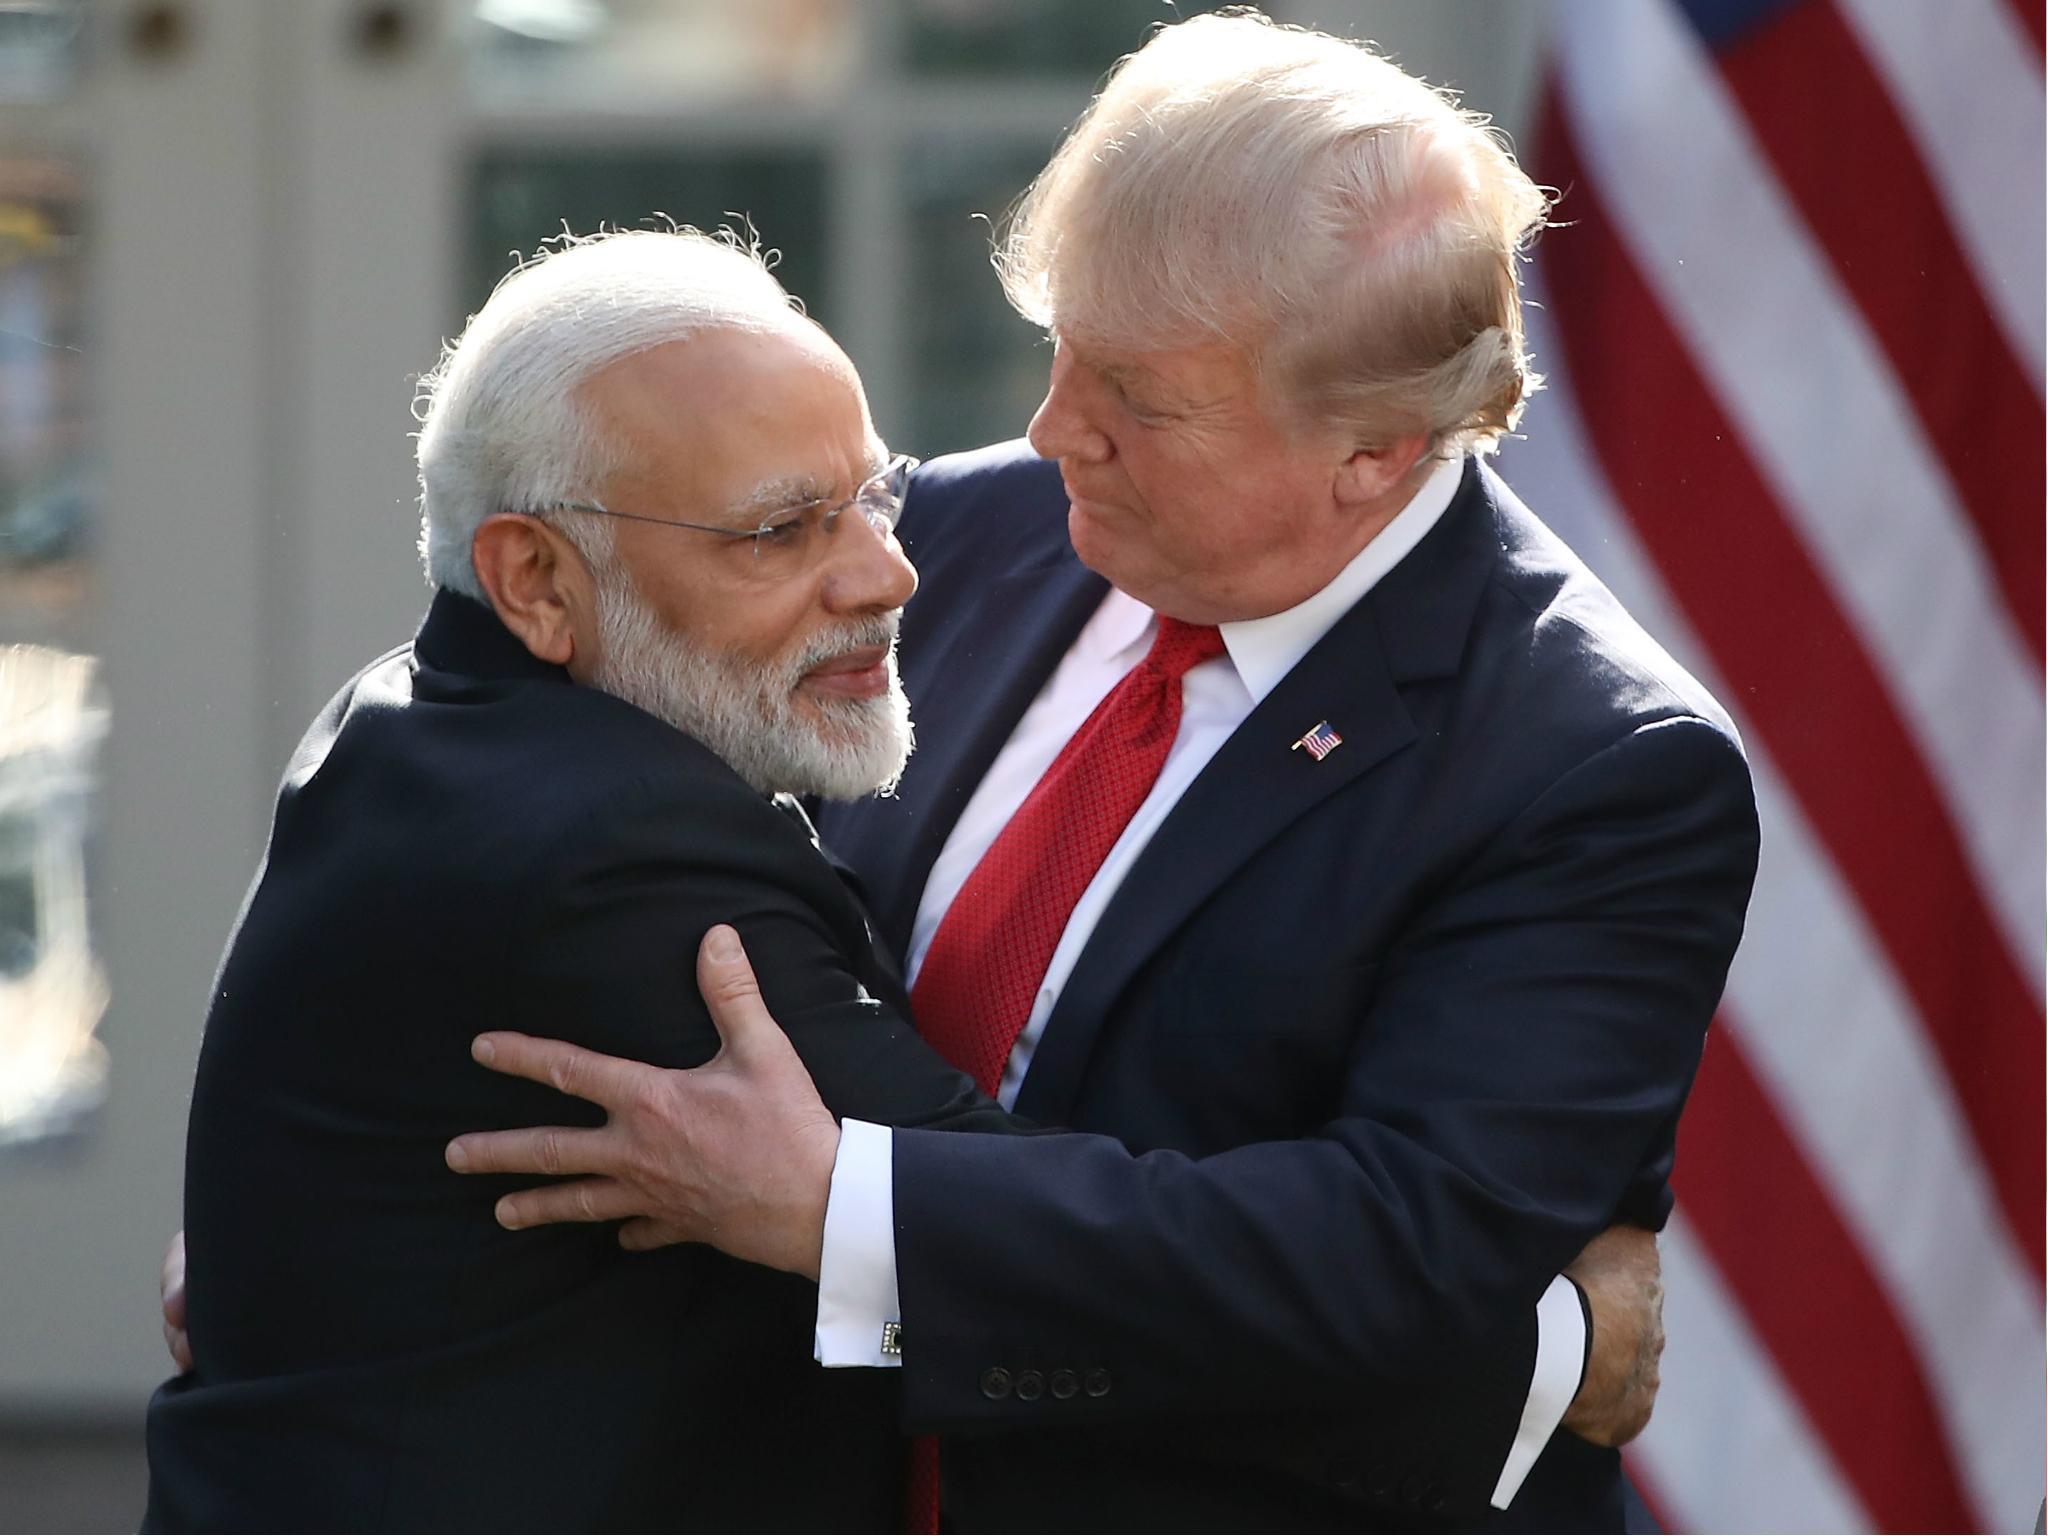 Trump has a keen following in India, particularly among supporters of prime minister Narendra Modi